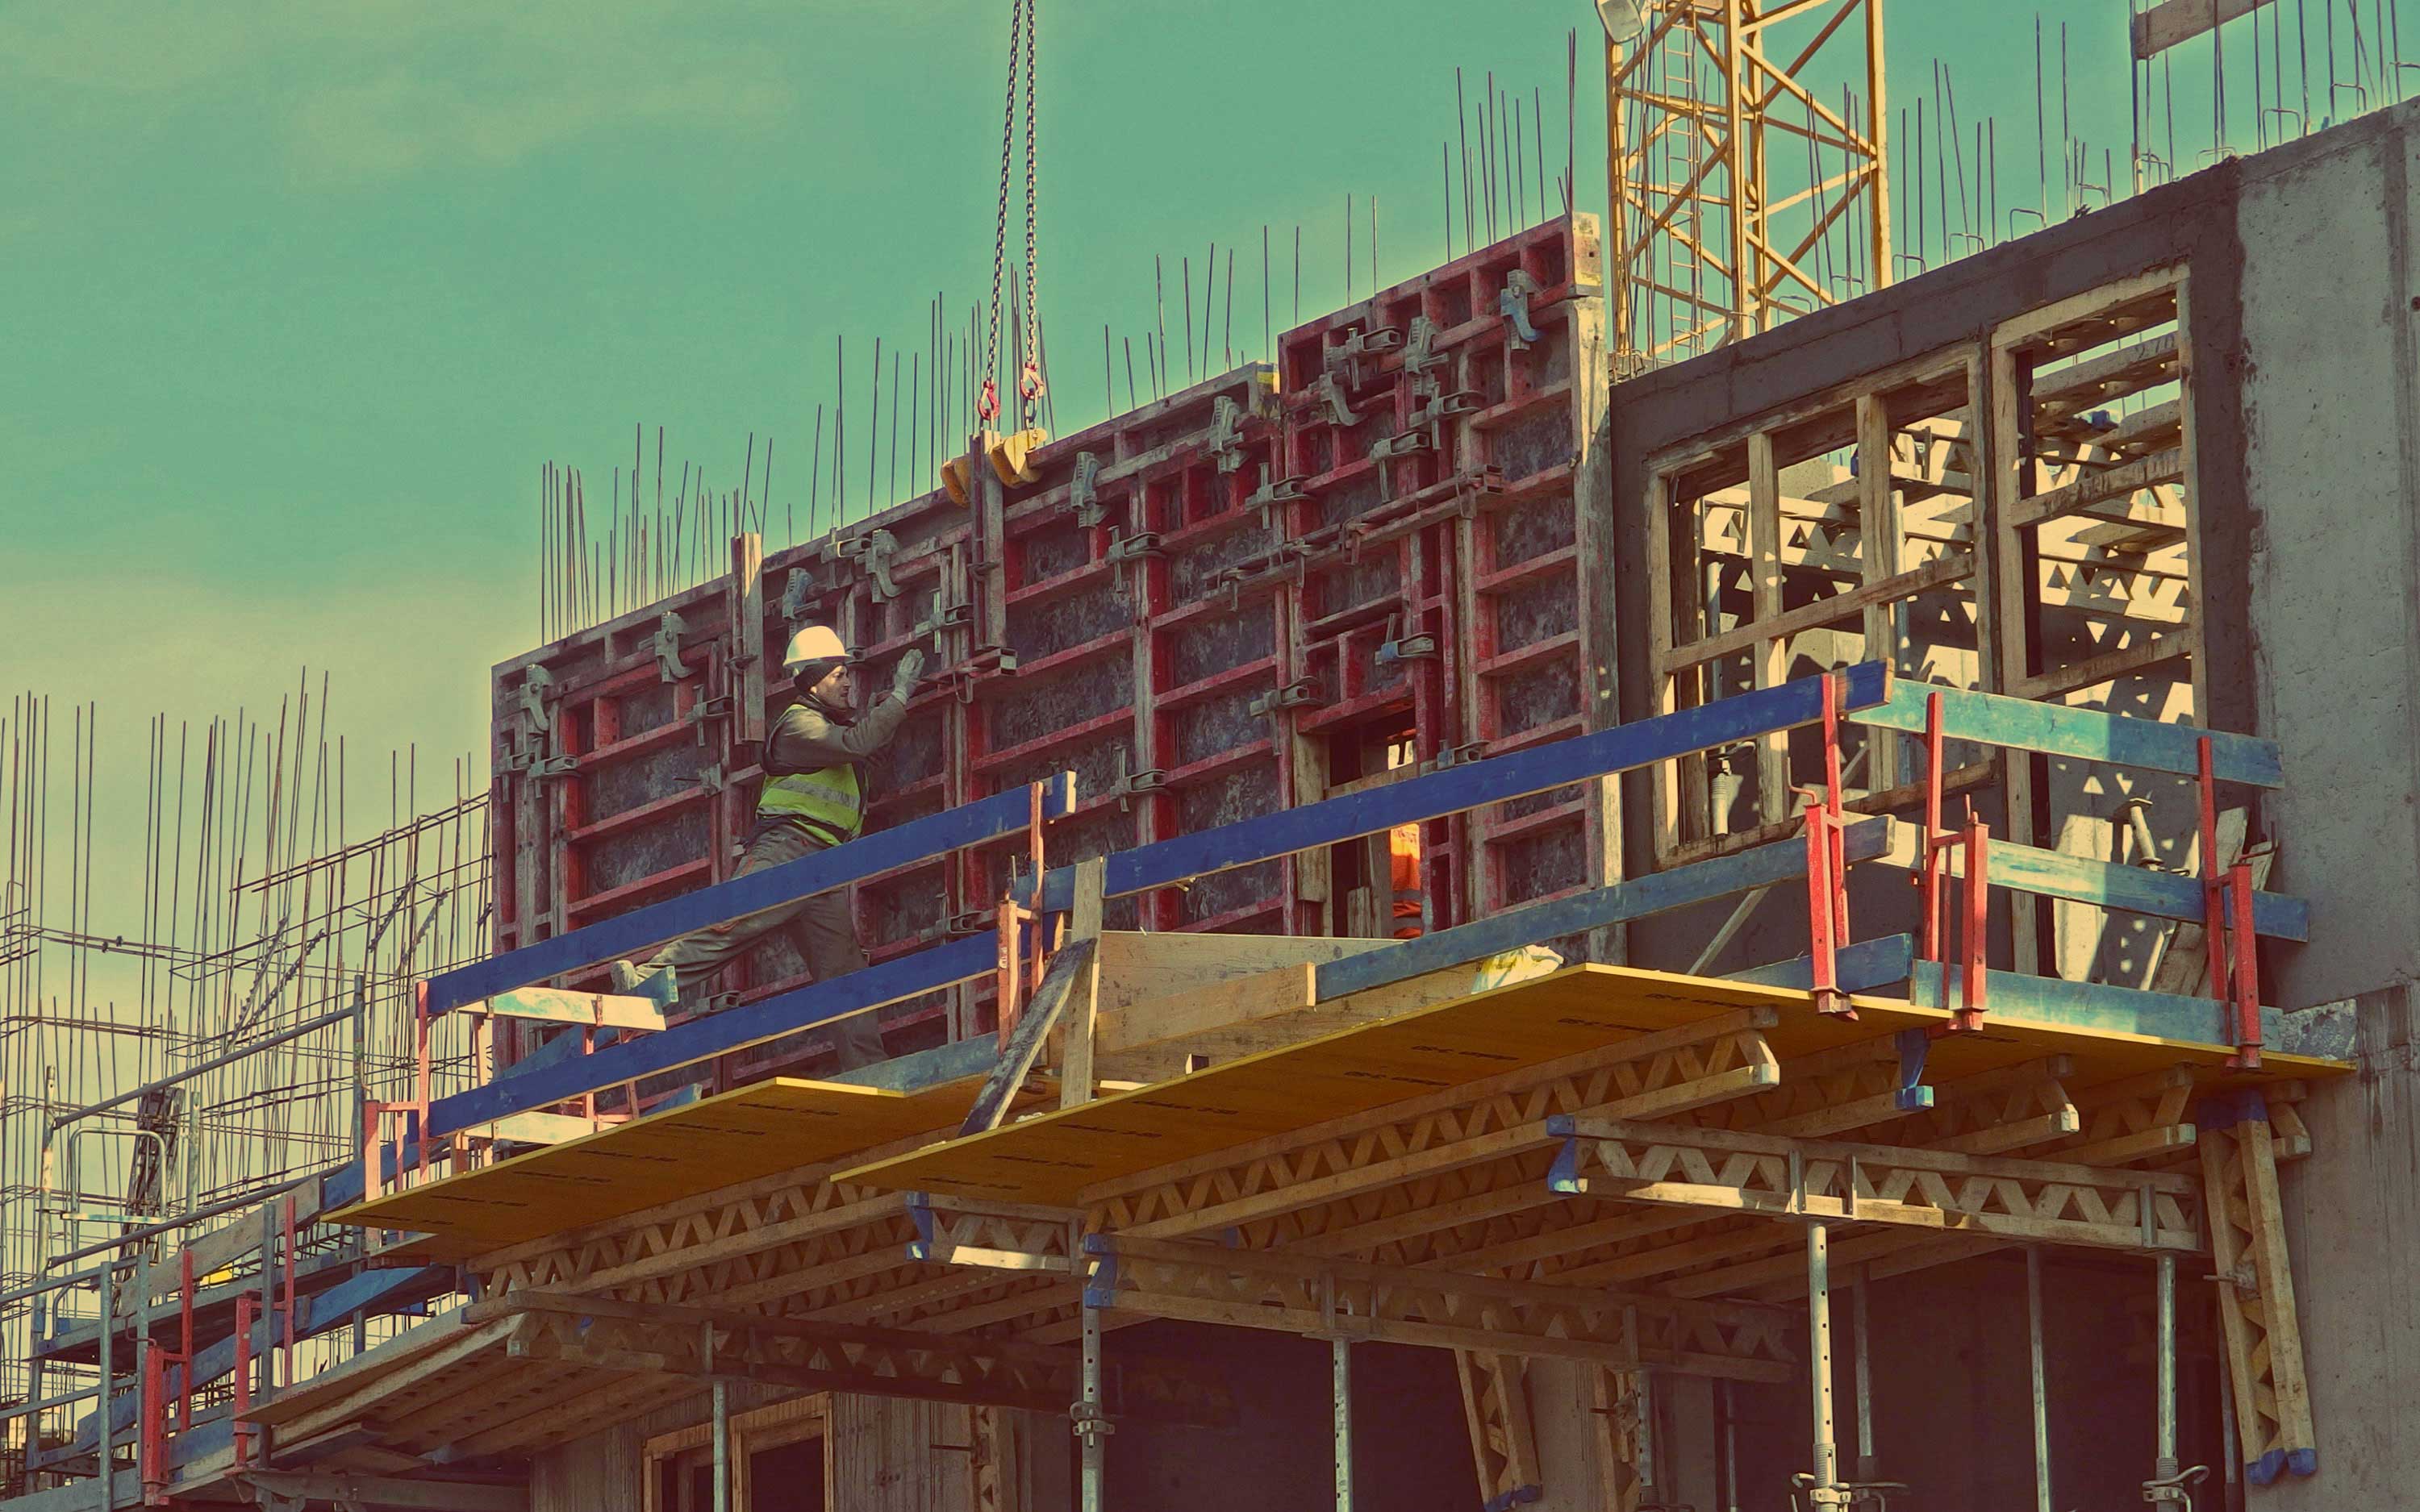 Free Image: Worker On A Construction Site | Libreshot Public Domain ...